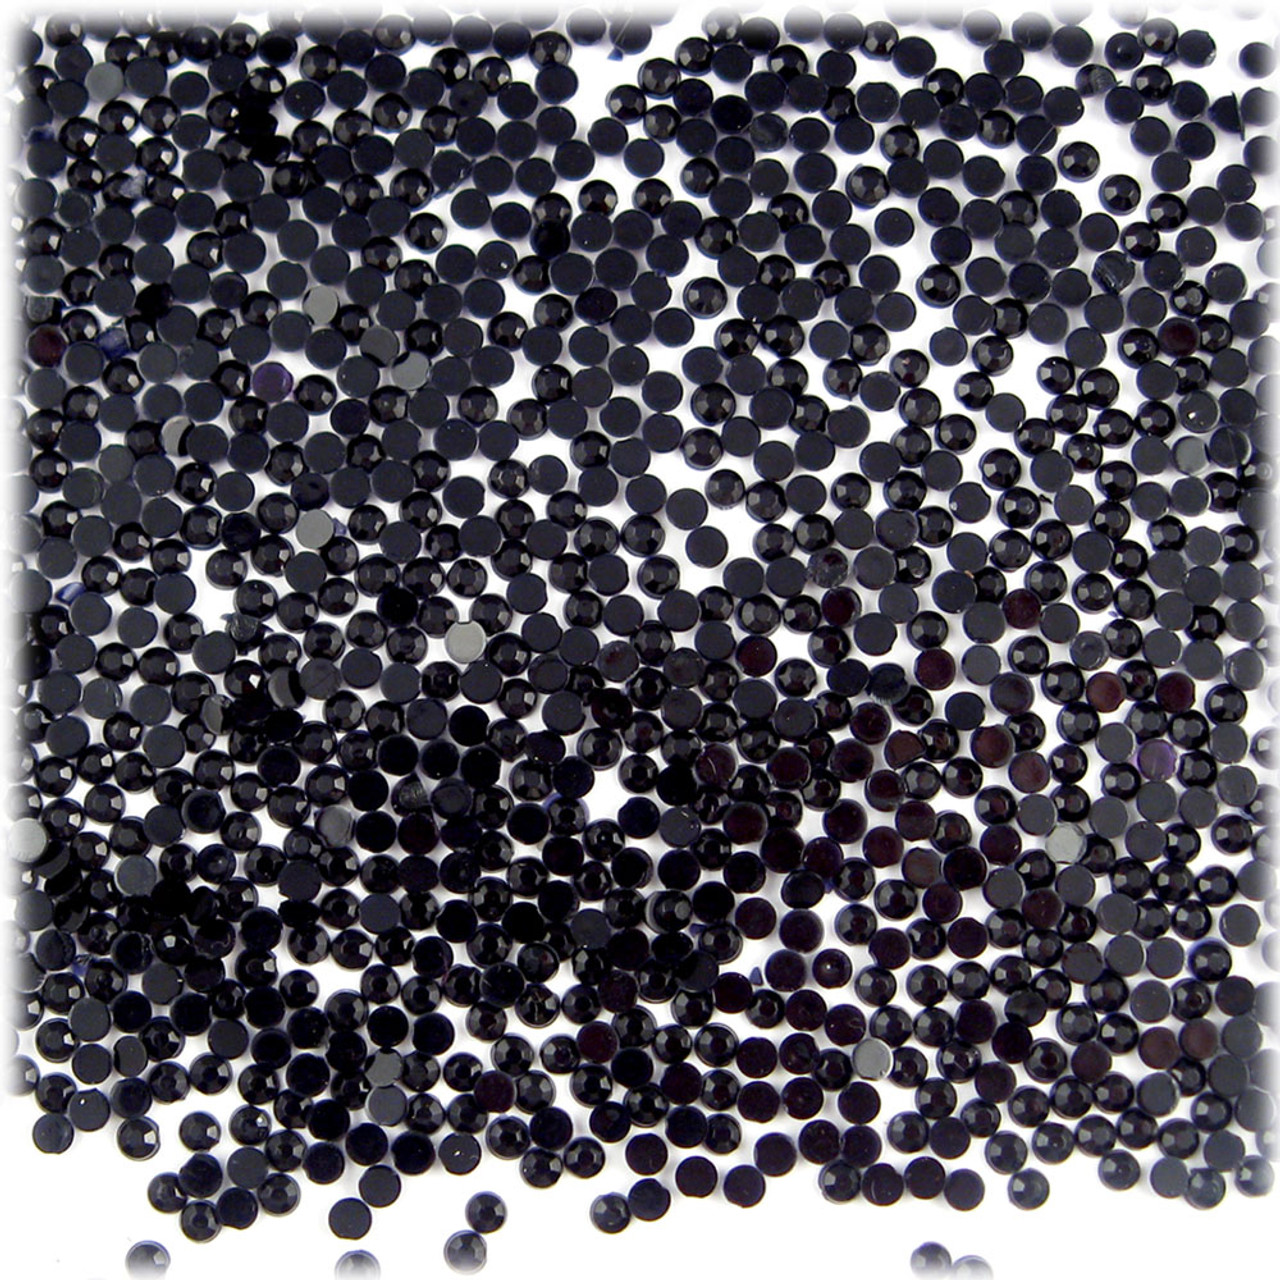 The Crafts Outlet Flatback Rhinestones, Faceted Round, 2mm 5000-pc, Jet Black